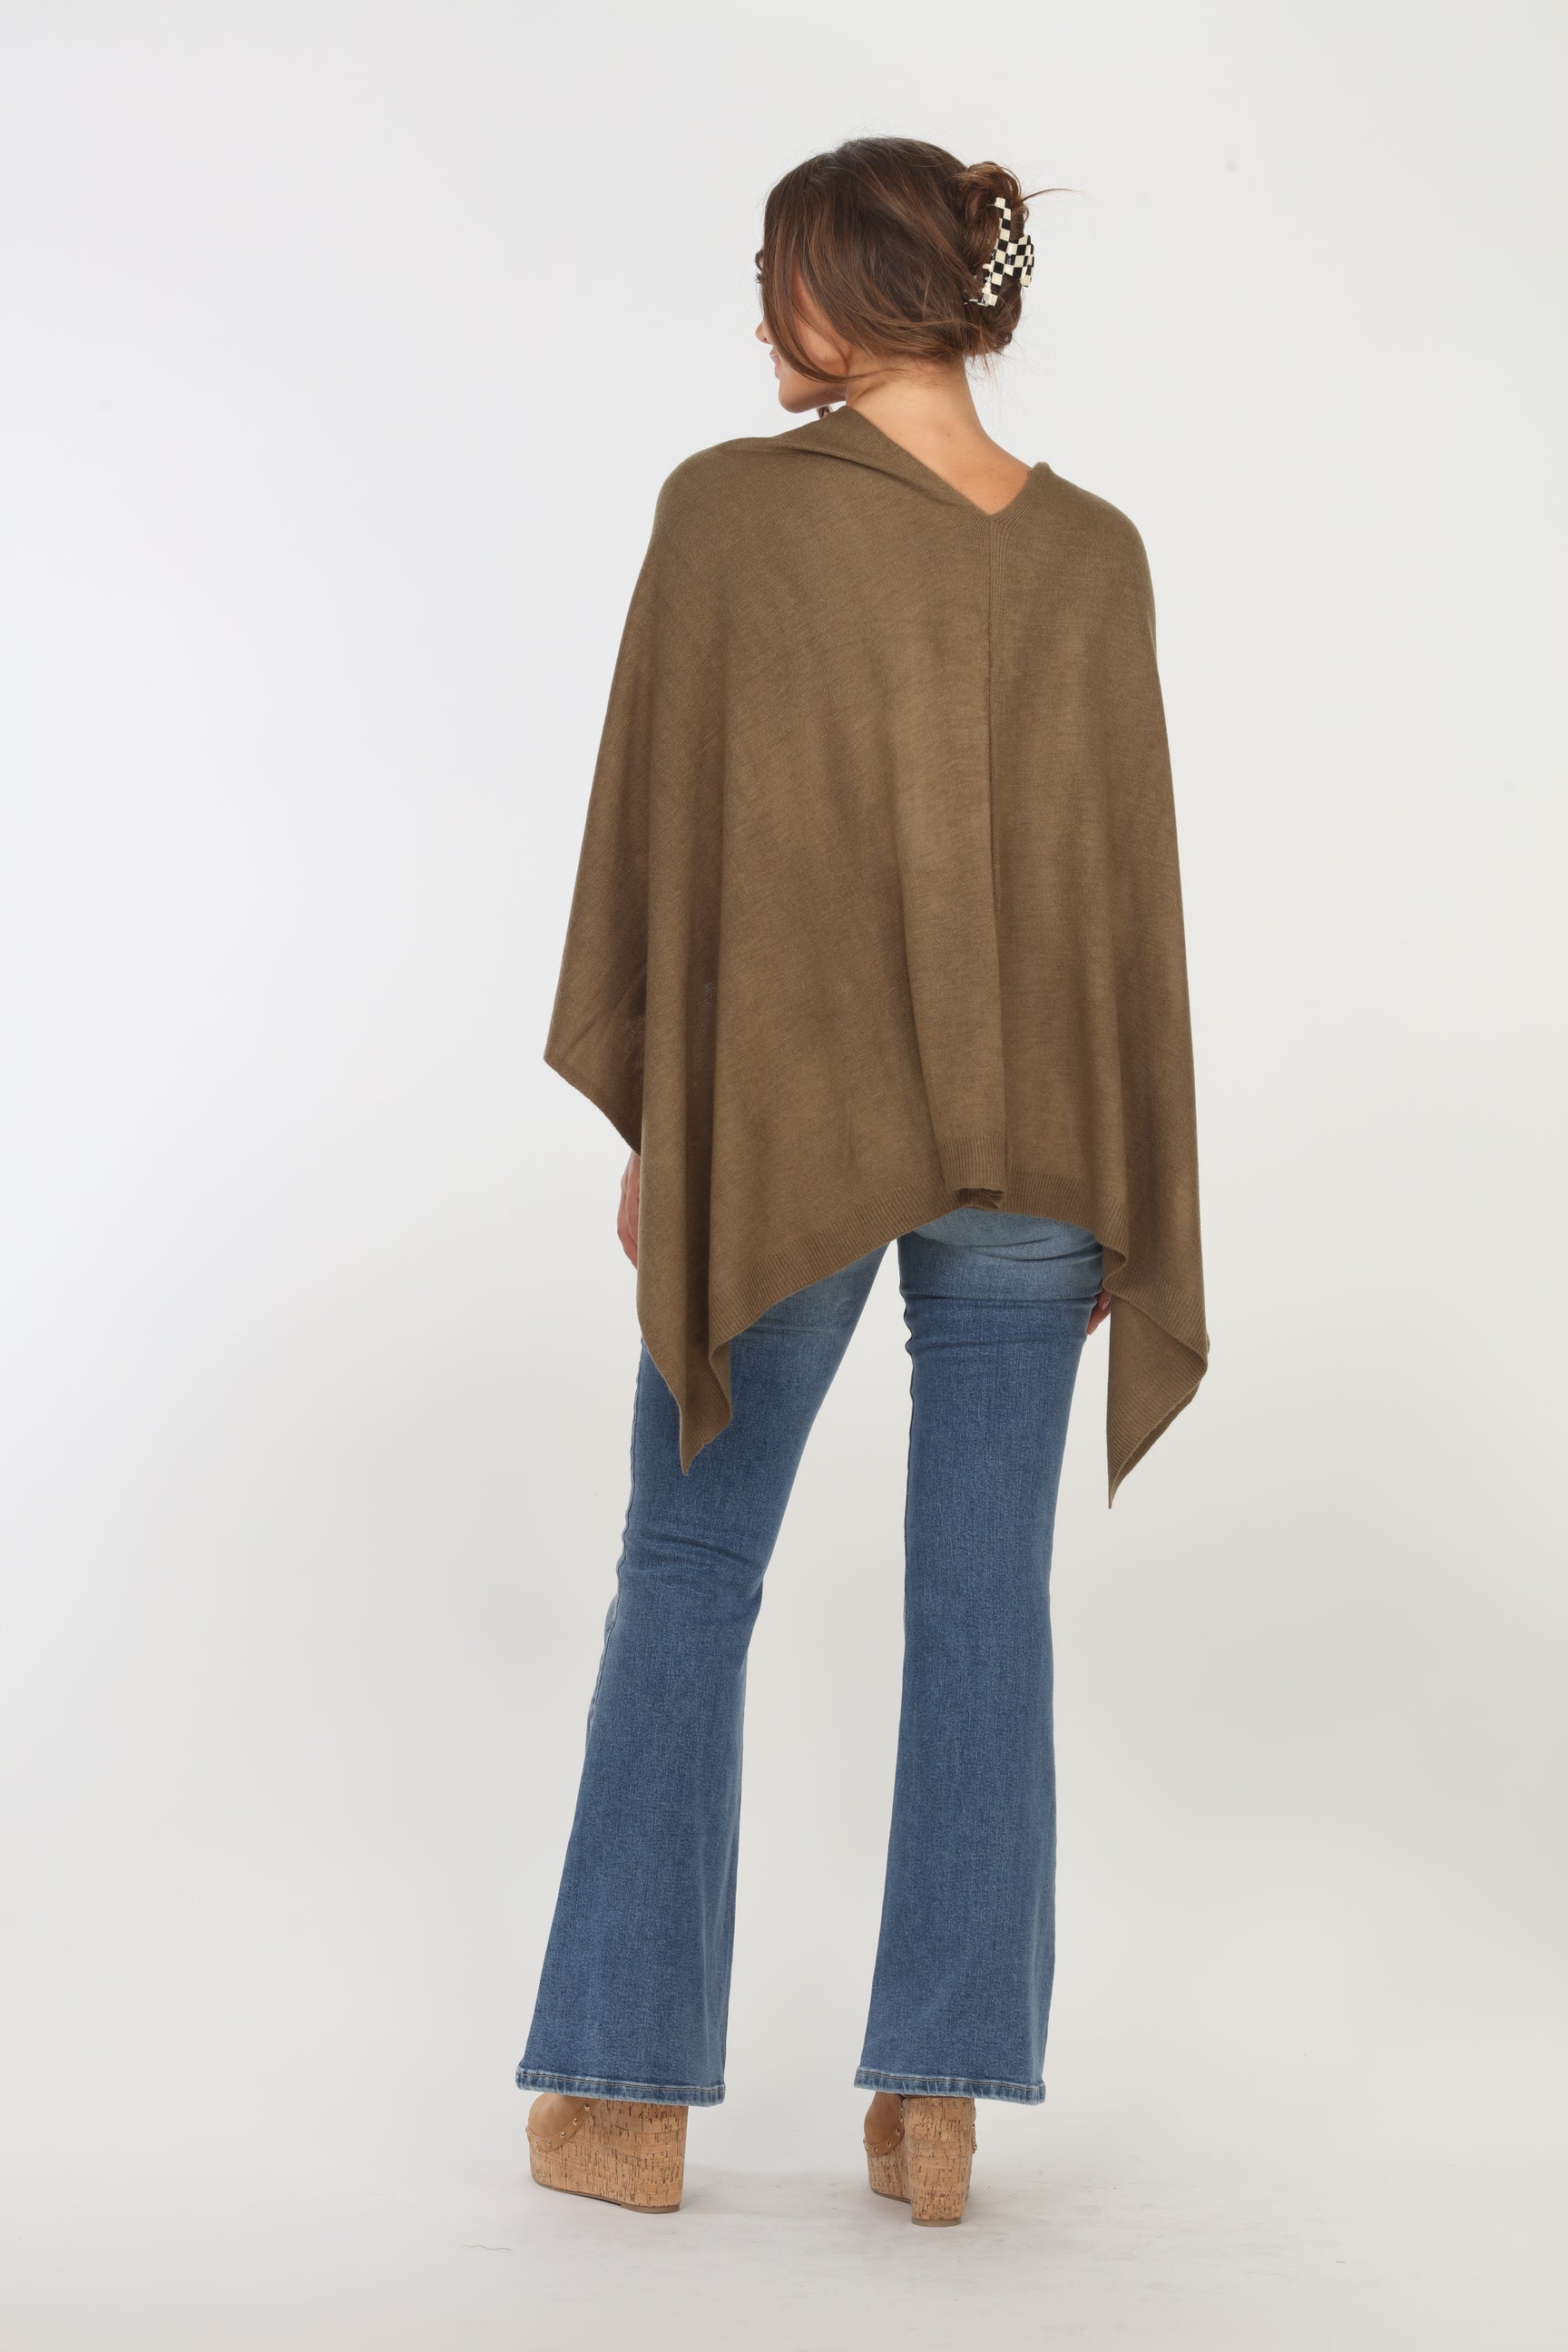 Olive Throw-On Poncho-BEST SELLER